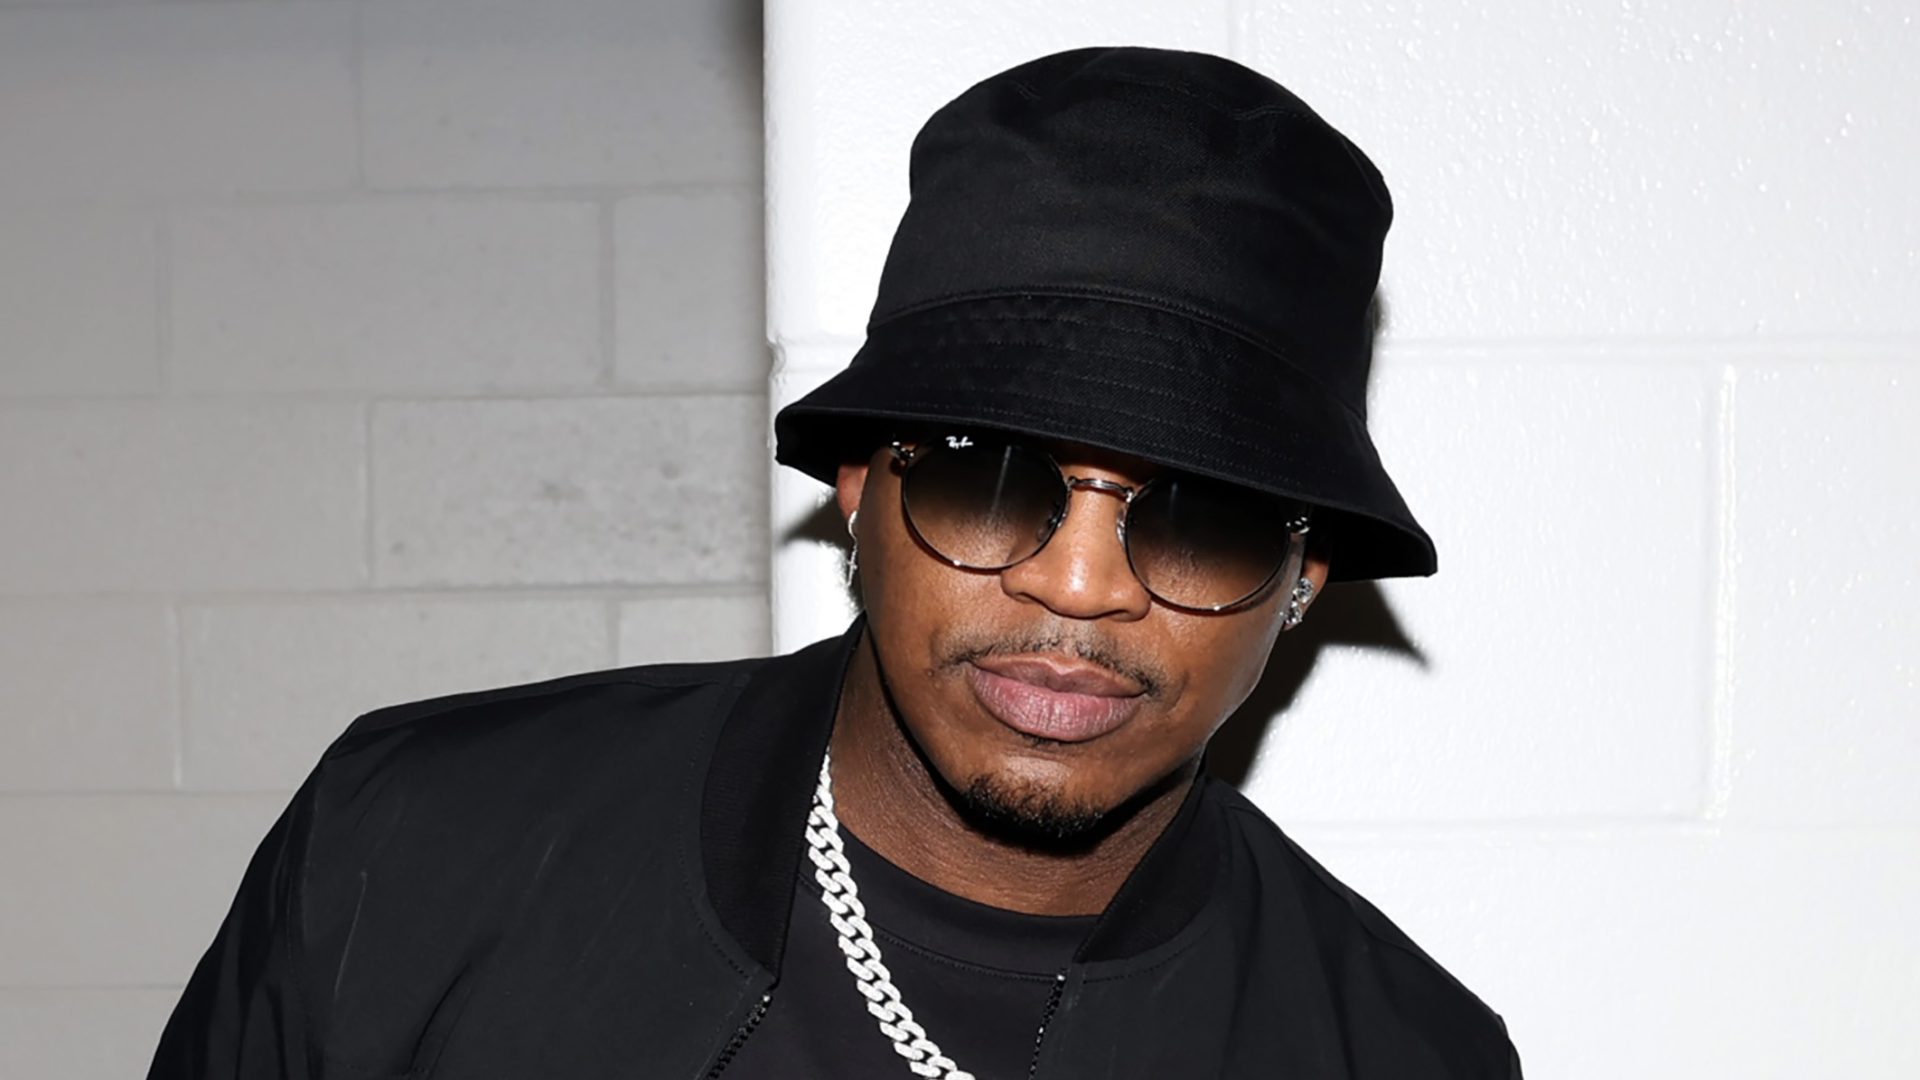 Social Media Users React After Ne-Yo Is Spotted Holding Hands With Two Women: 'All Those Songs Had Me Fooled' (Video)